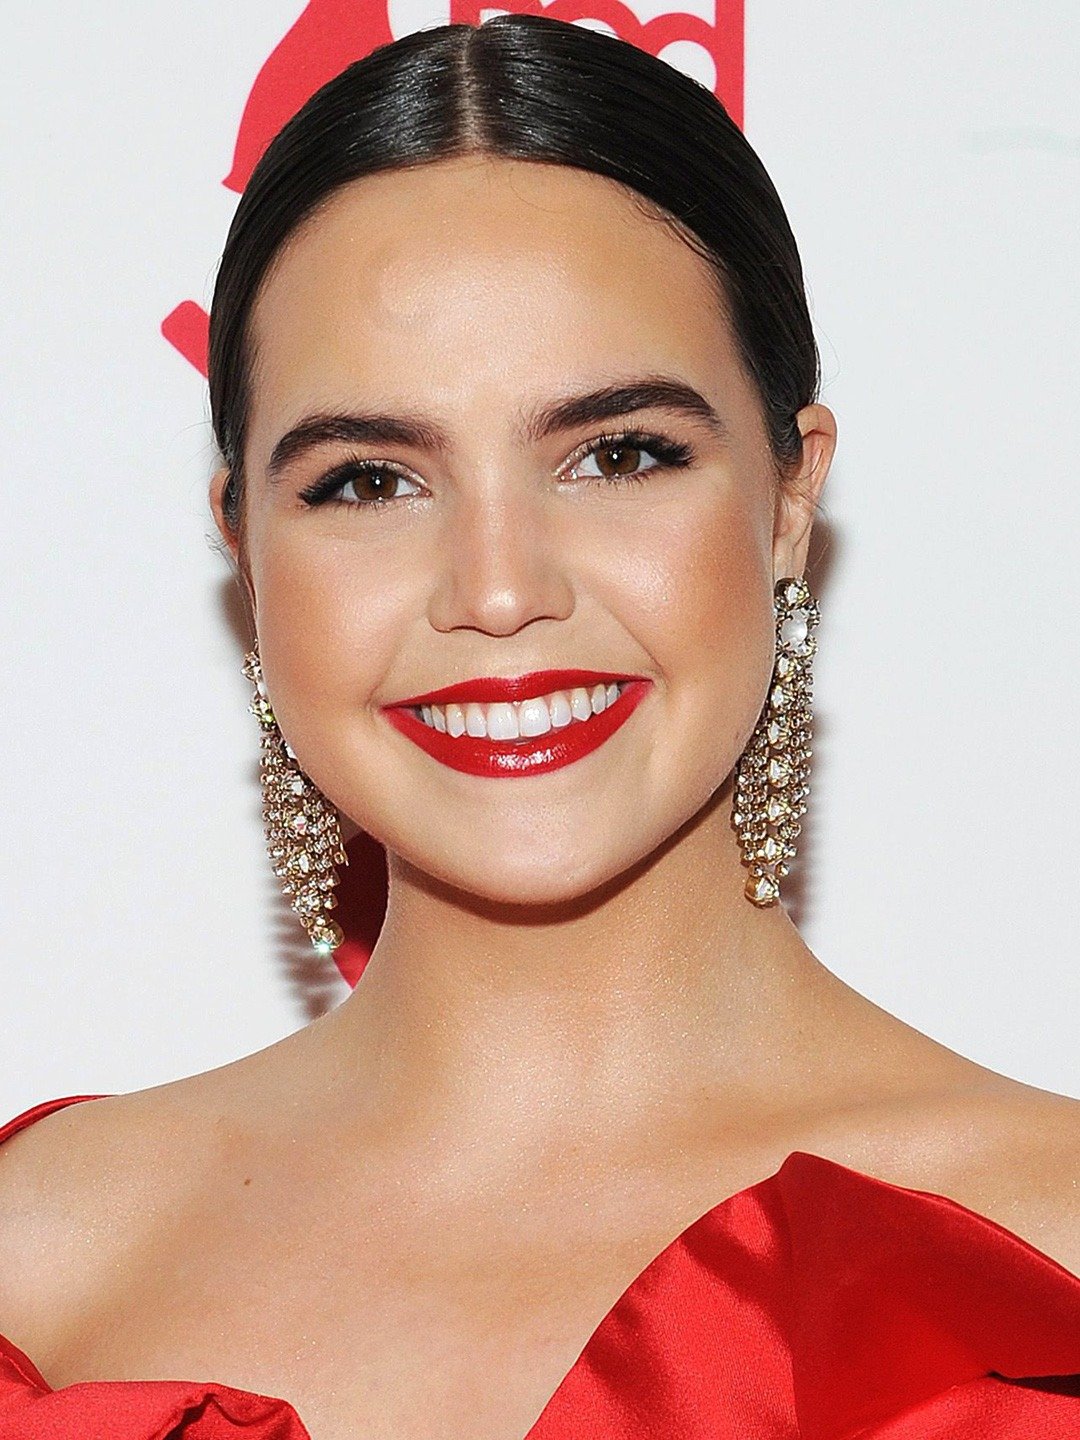 Bailee Madison - Actress, Singer, Producer